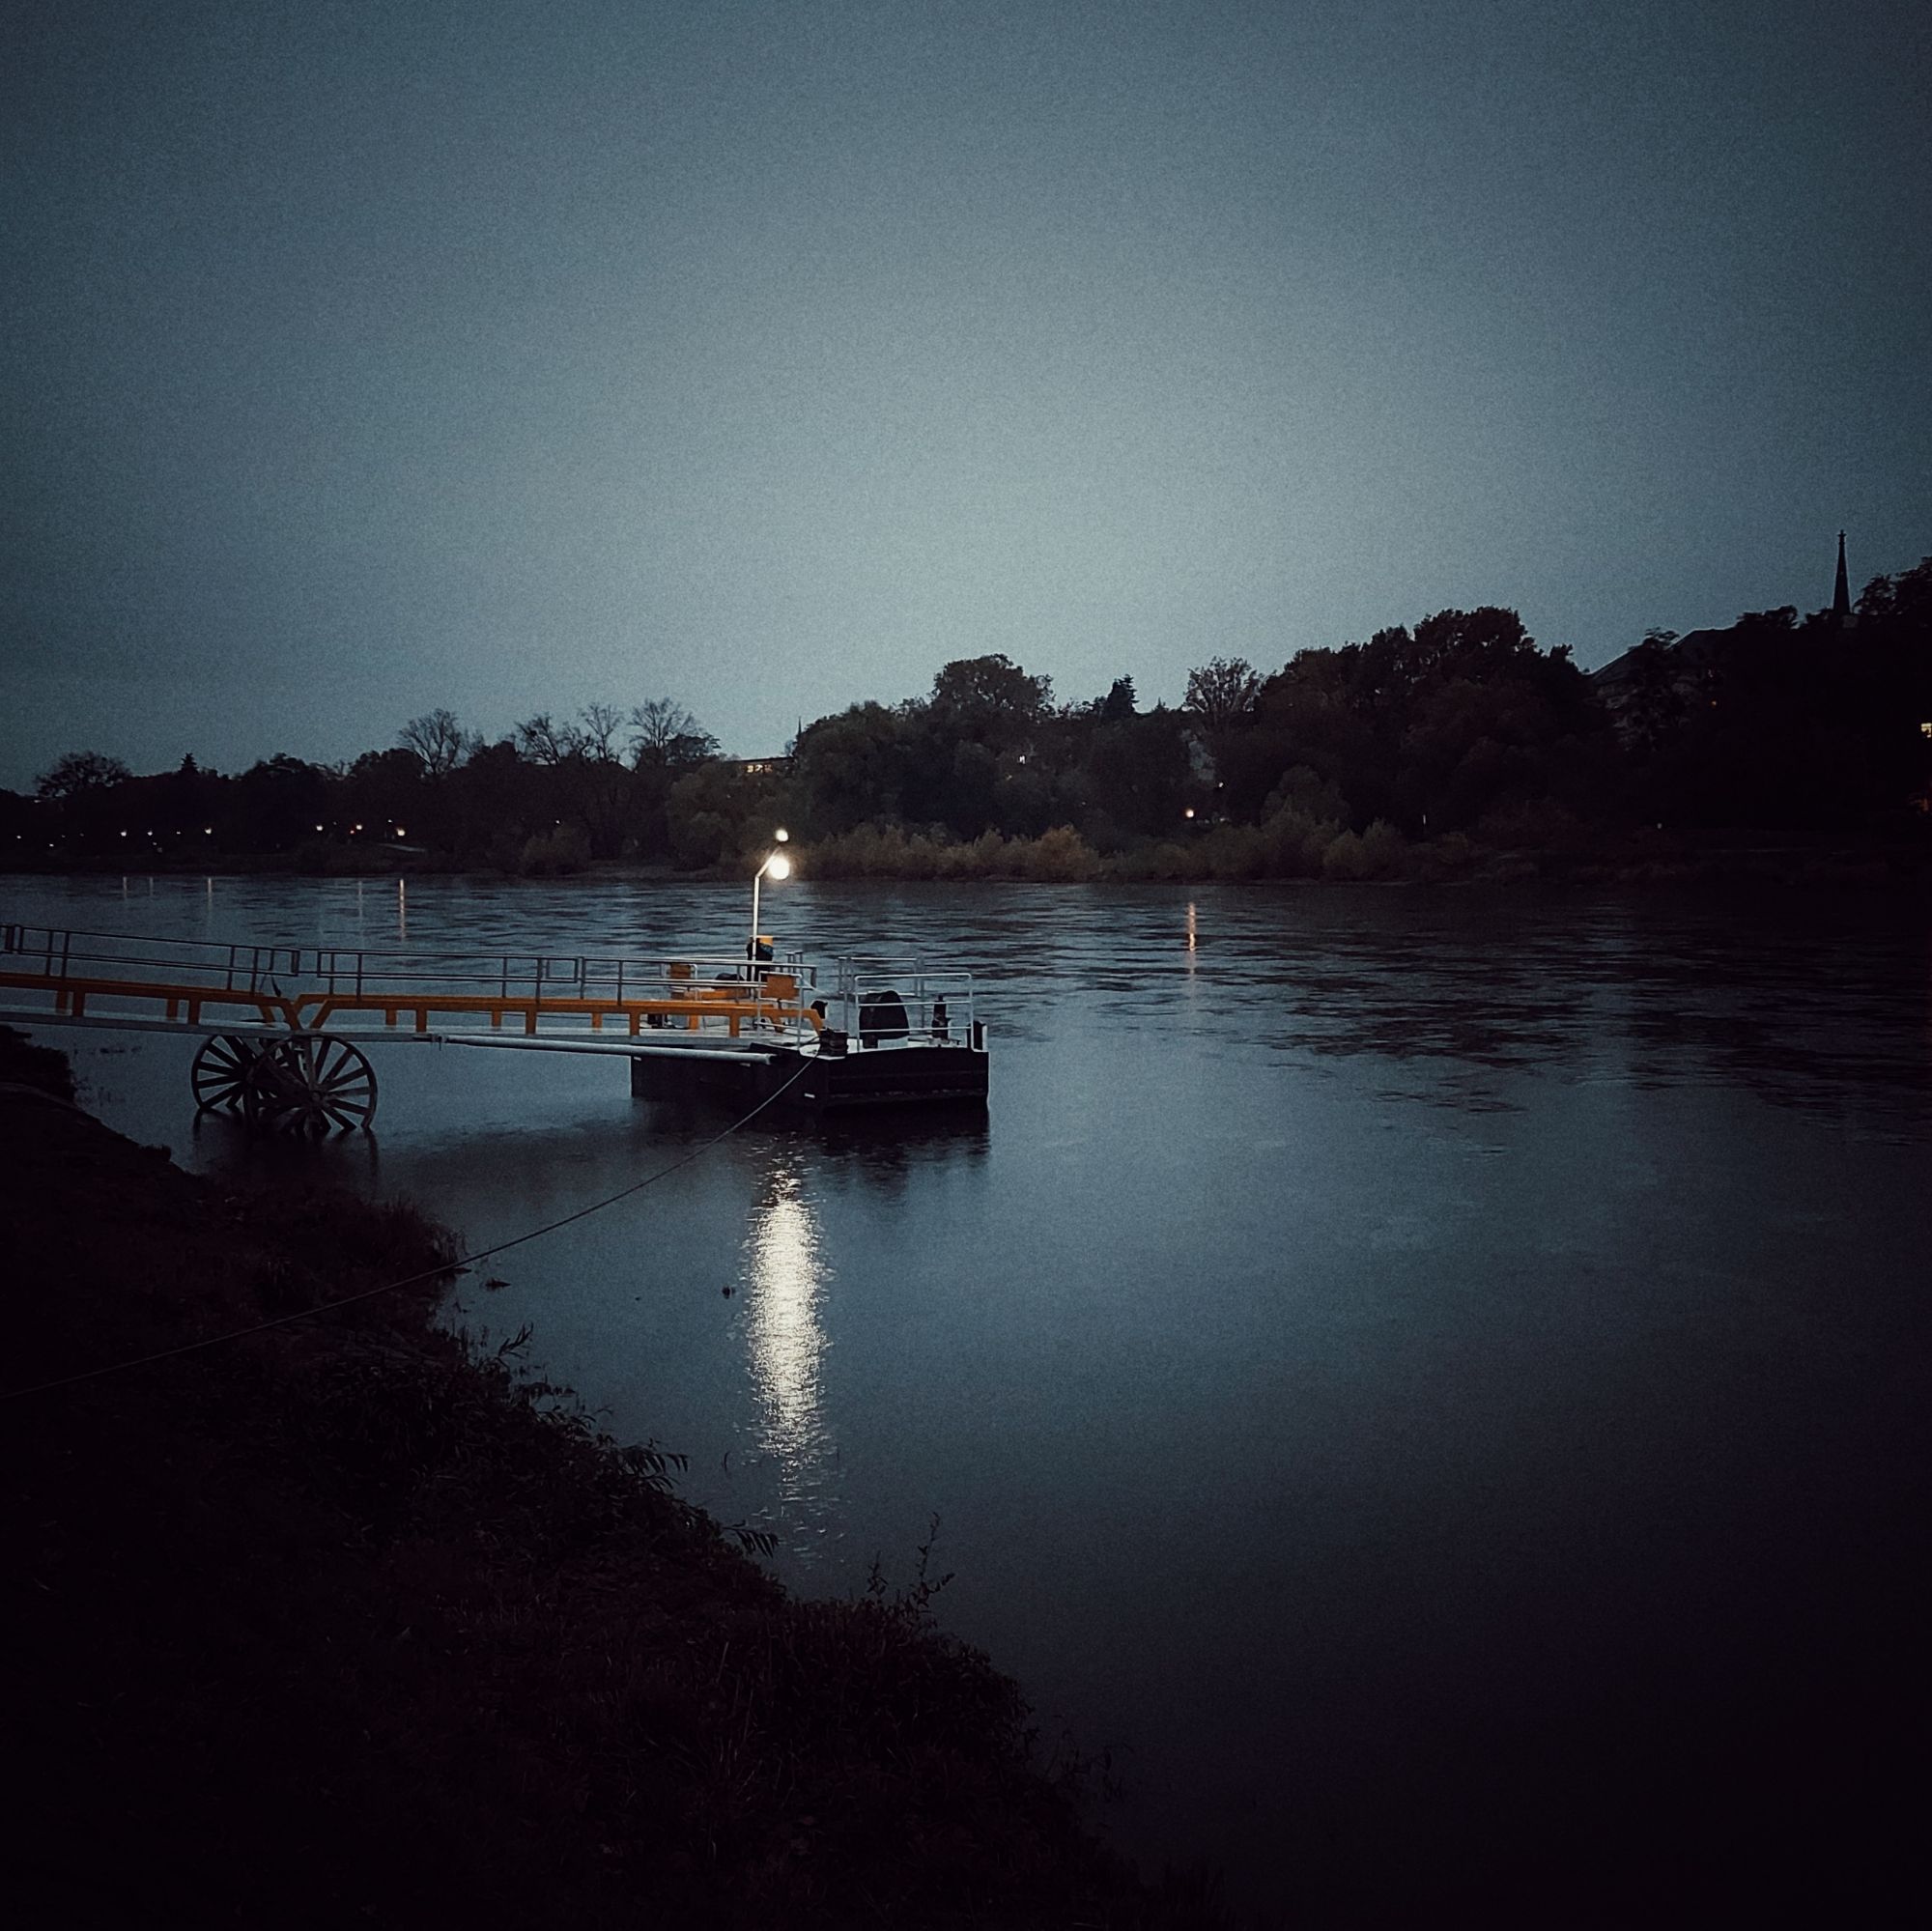 A light on a ferry stop, Elbe river. Early night.